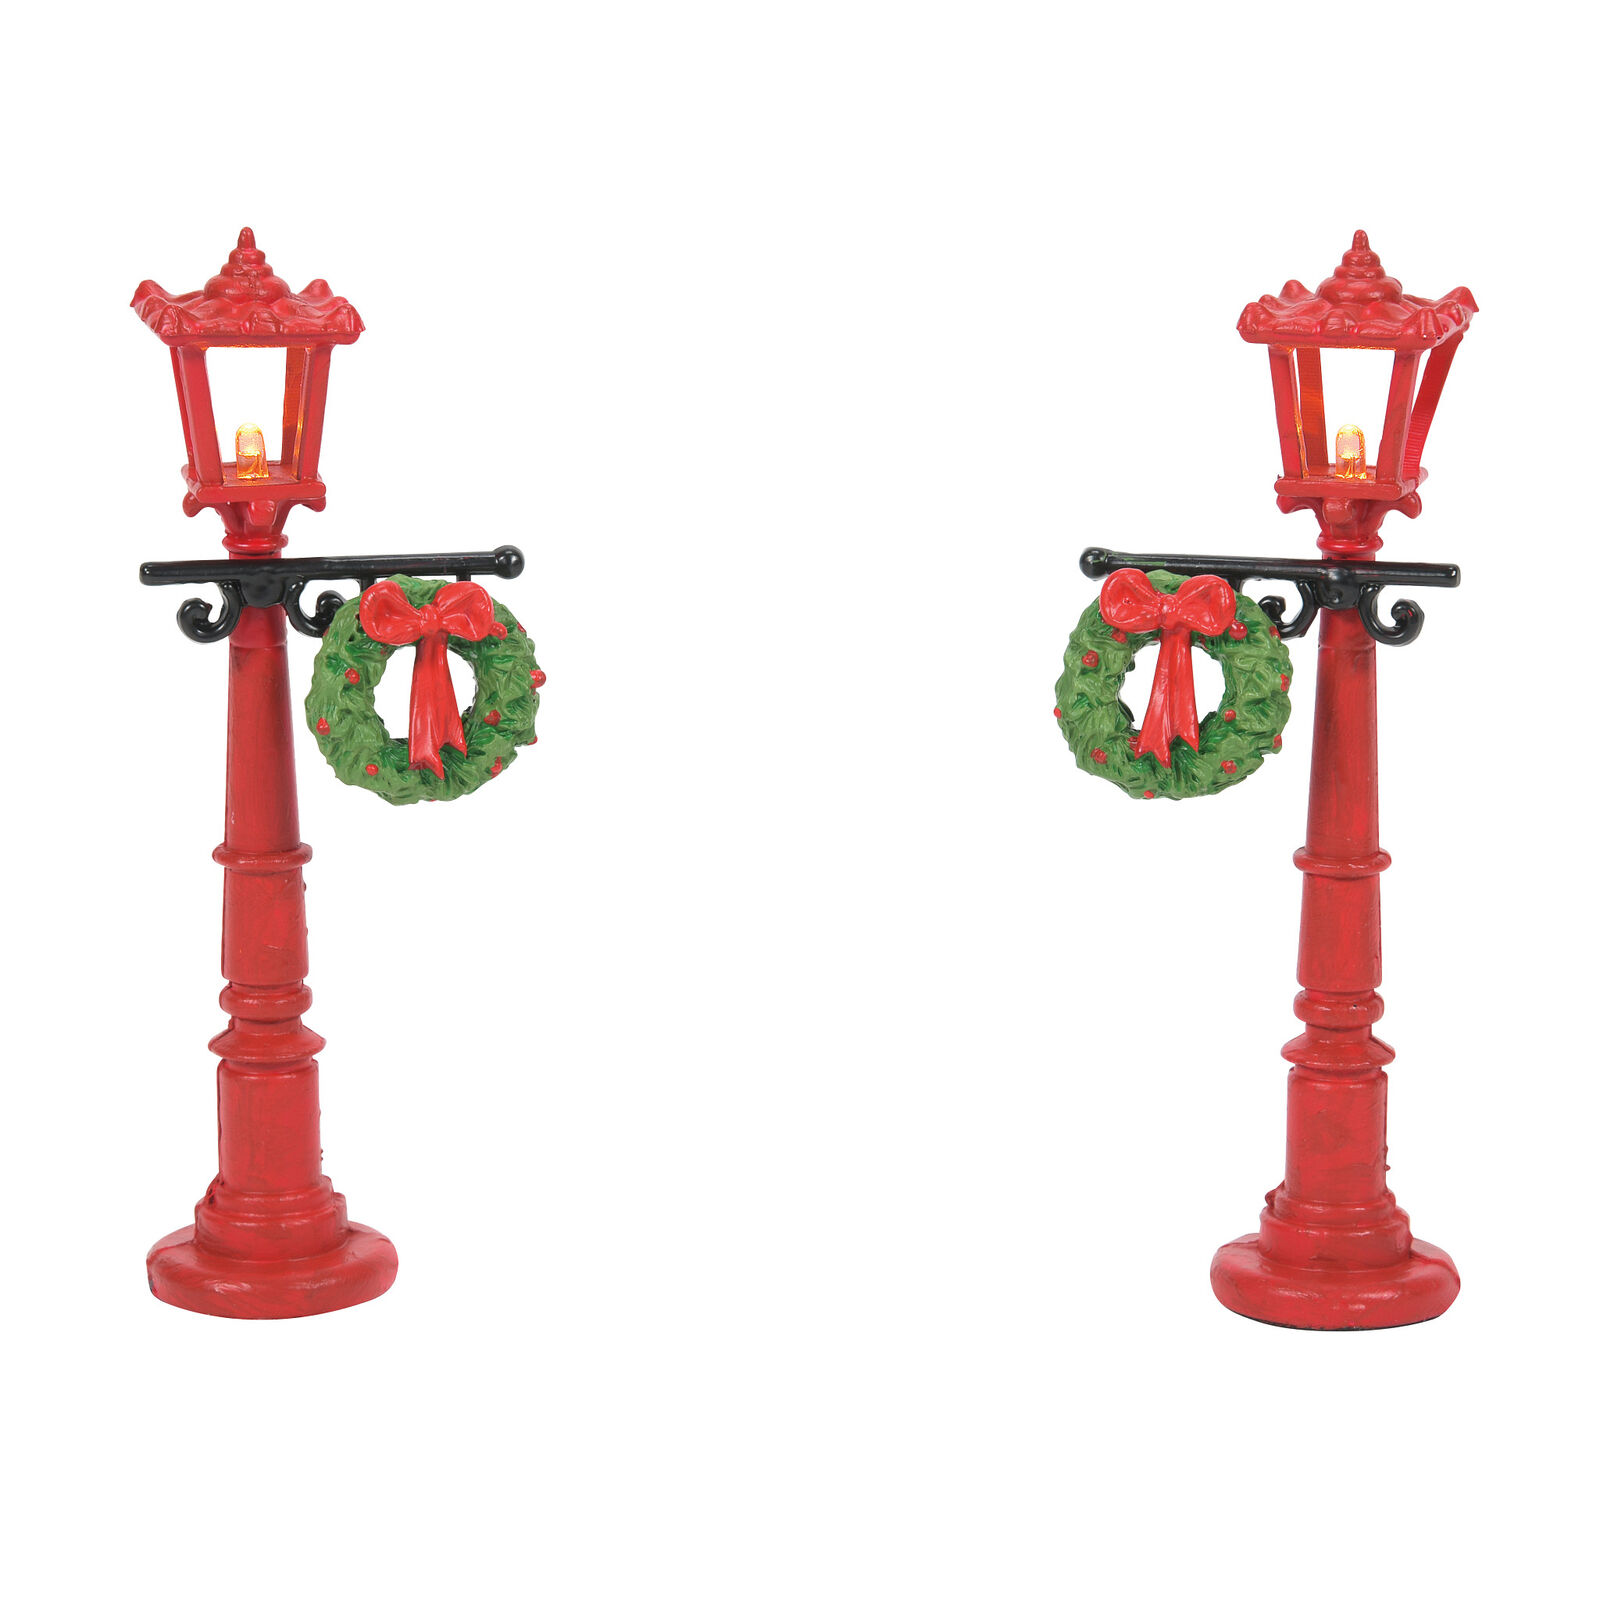 Department 56 Village Accessories Street Lamps with Wreathes Lit Figurine Set